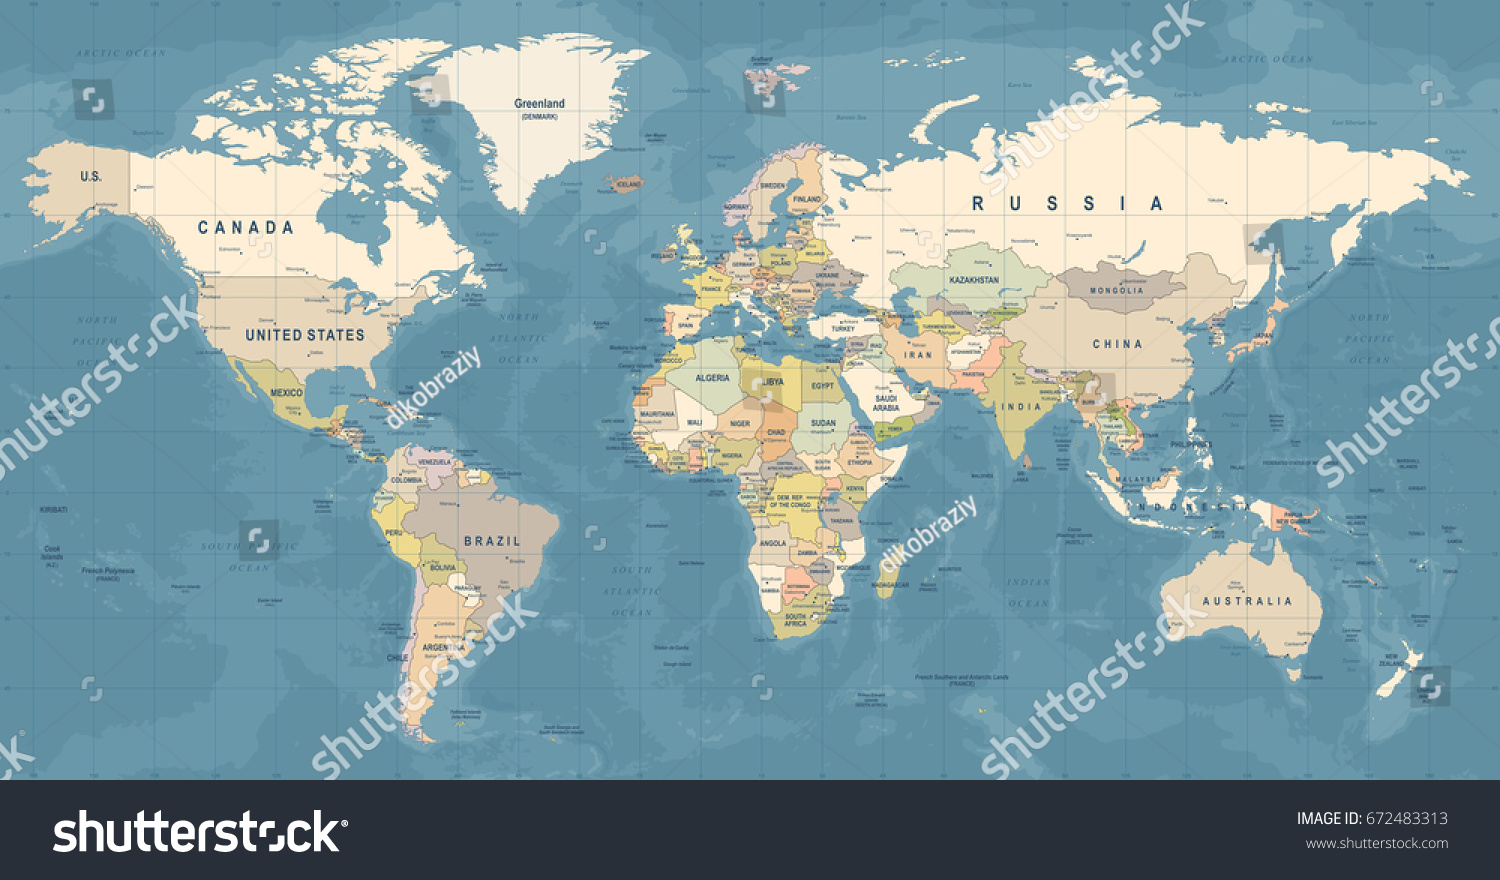 Highly detailed world map